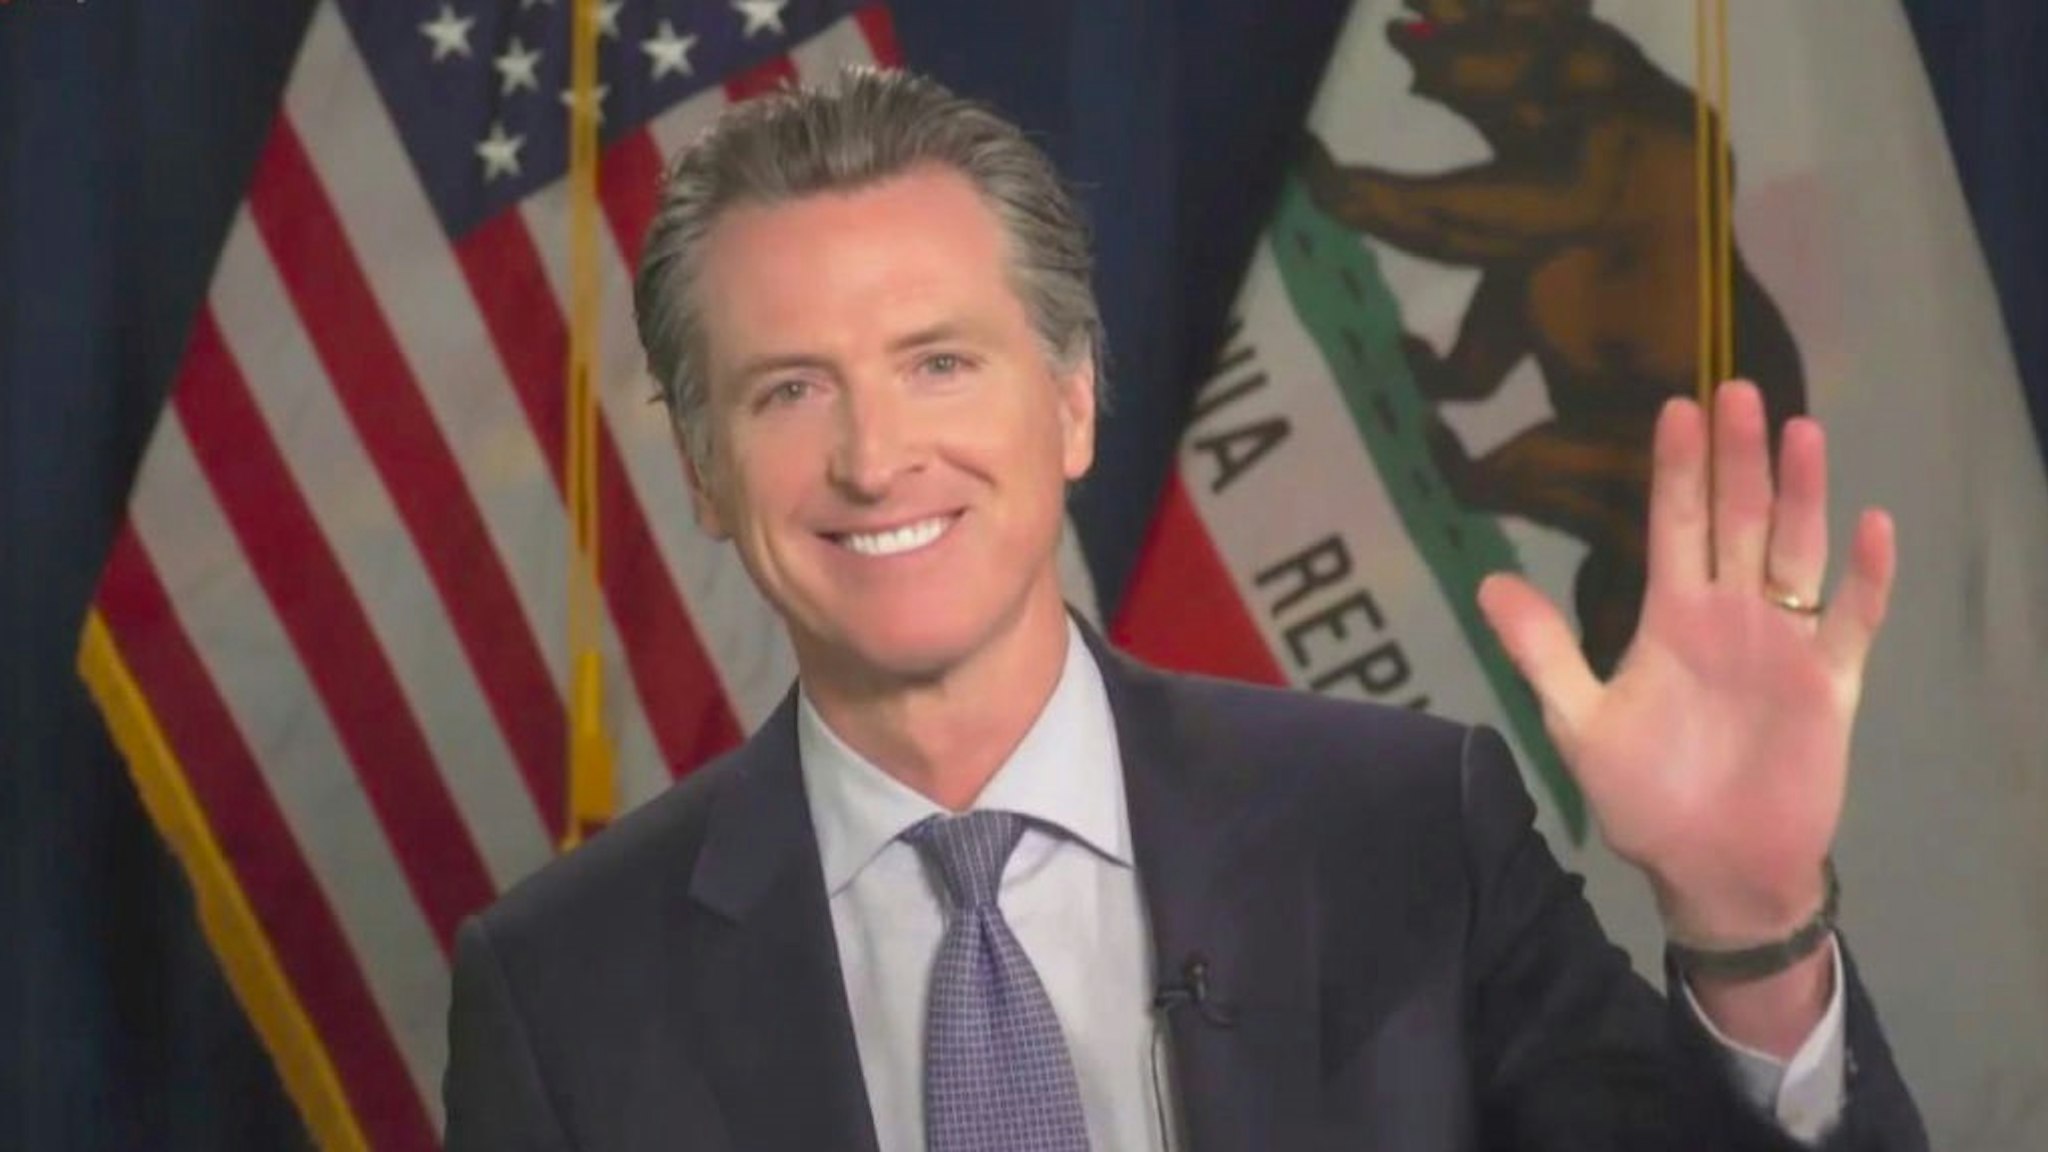 LOS ANGELES - JUNE 17: James chats with California Governor Gavin Newsom from his garage on THE LATE LATE SHOW WITH JAMES CORDEN, scheduled to air Wednesday June 17, 2020 (12:37-1:37 AM, ET/PT) on the CBS Television Network. Image is a screen grab. (Photo by CBS via Getty Images)